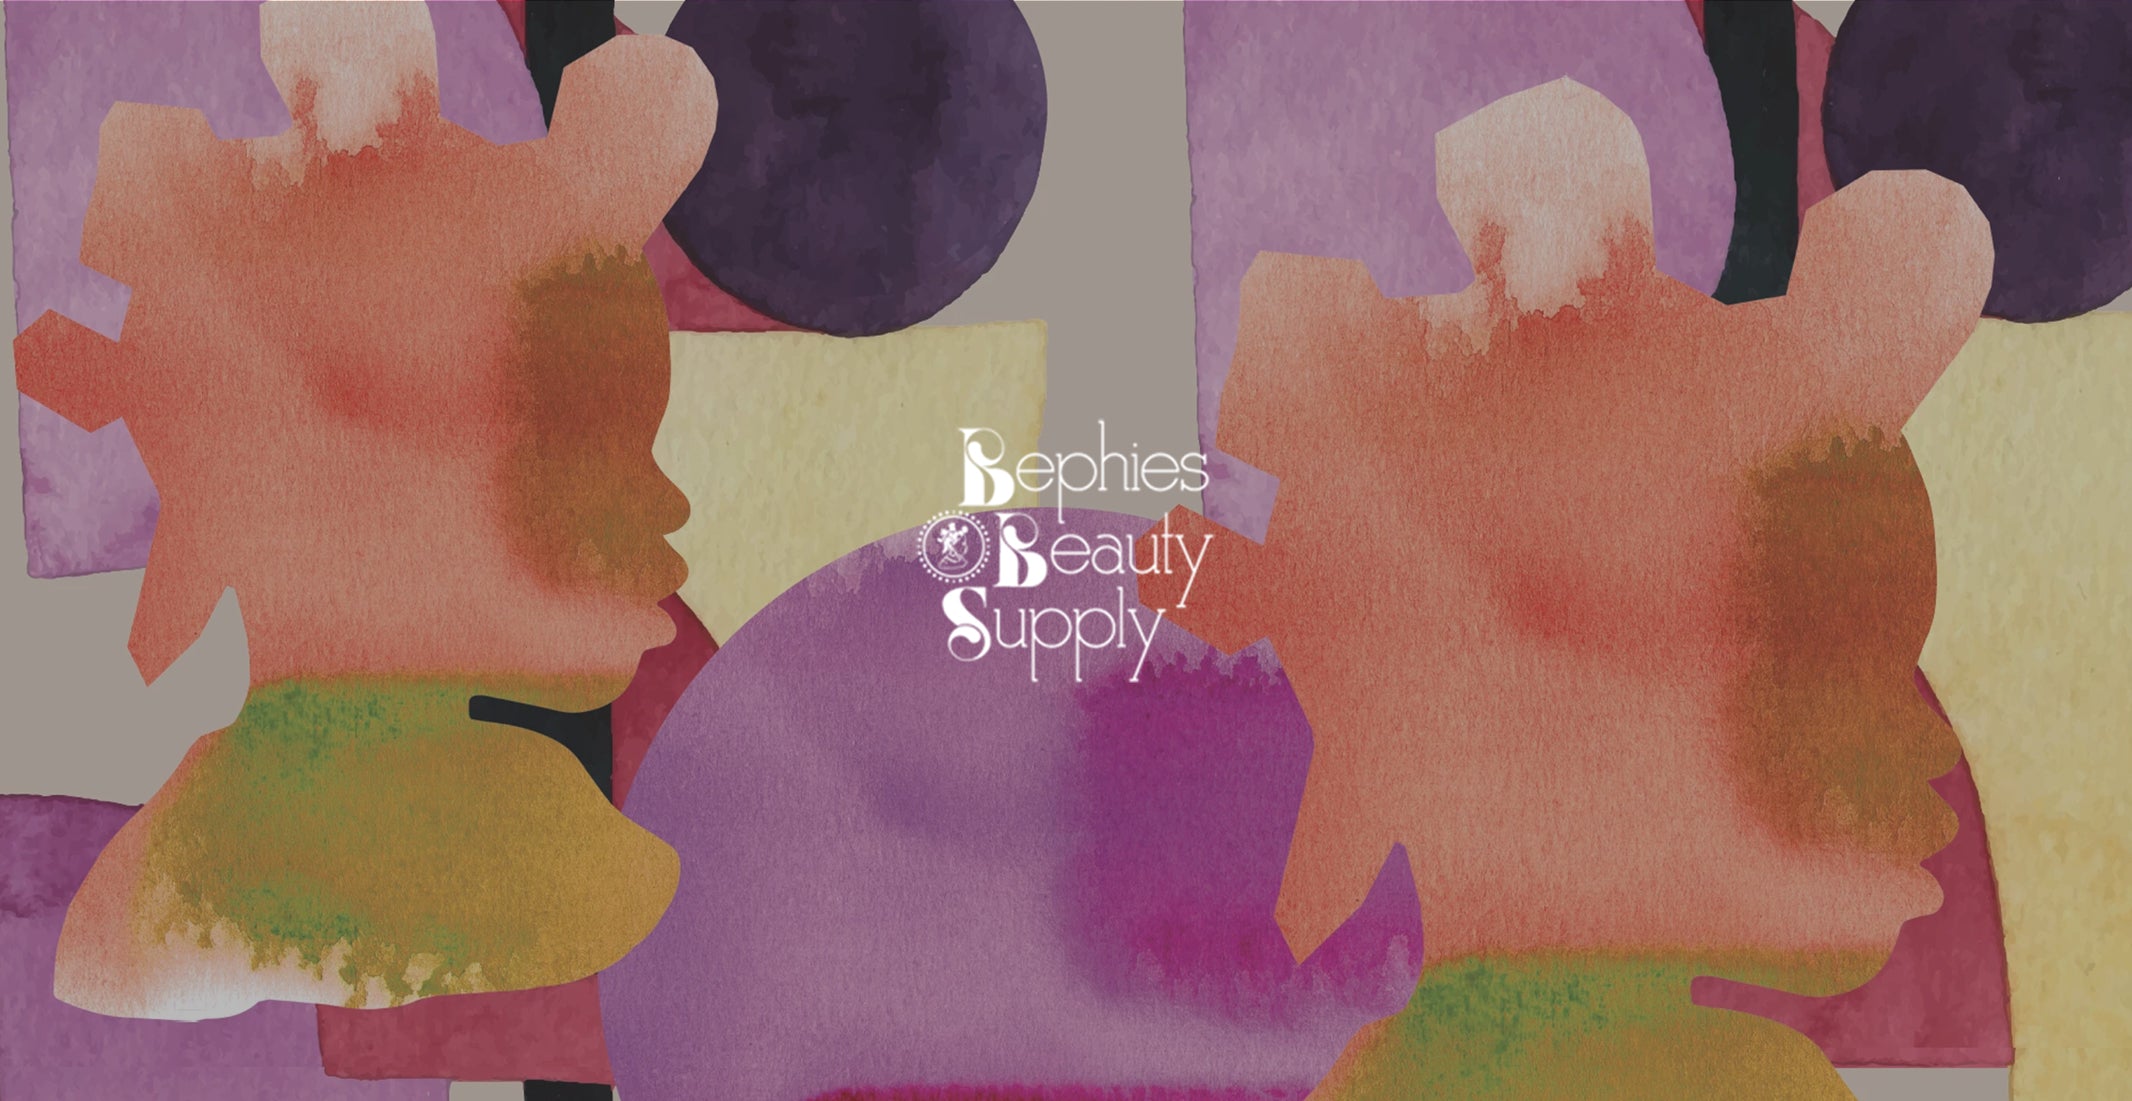 Bephies Beauty Supply